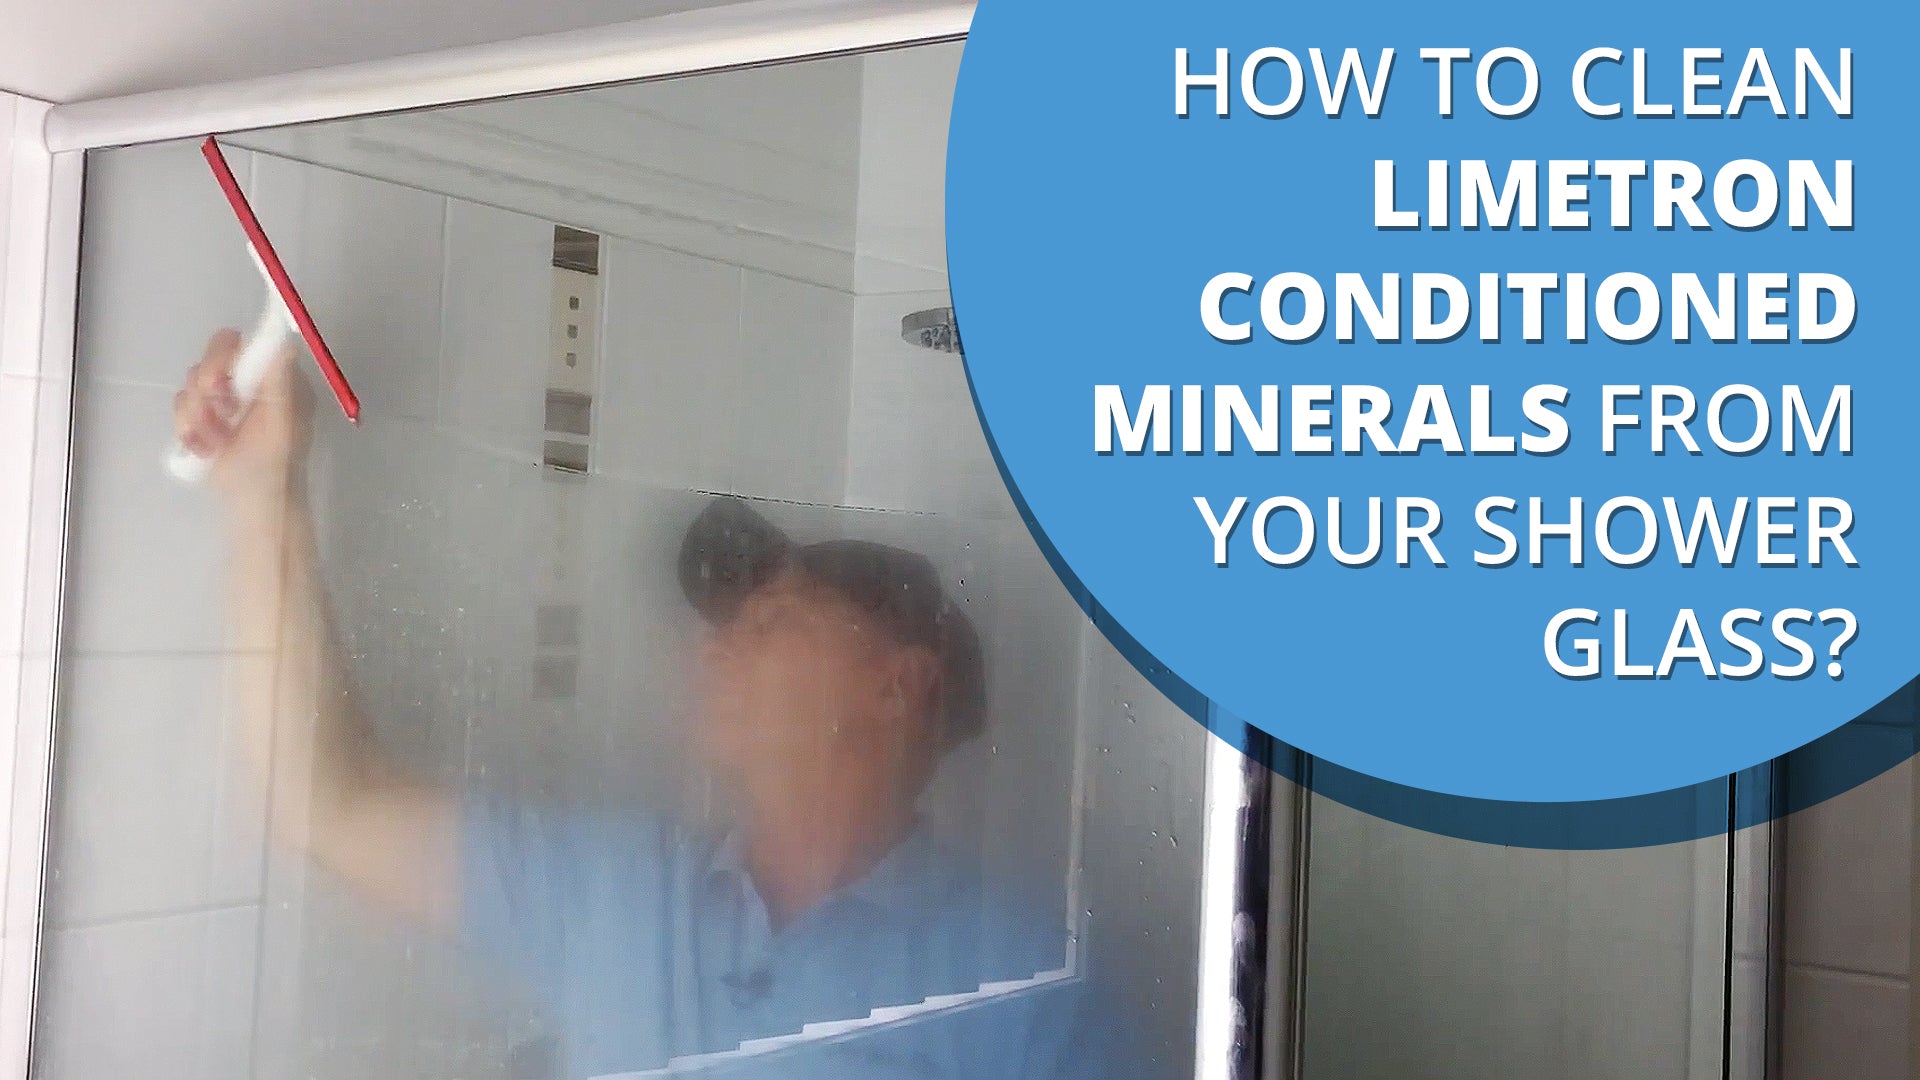 [VIDEO] How to Clean the Limetron Conditioned Minerals from your shower glass